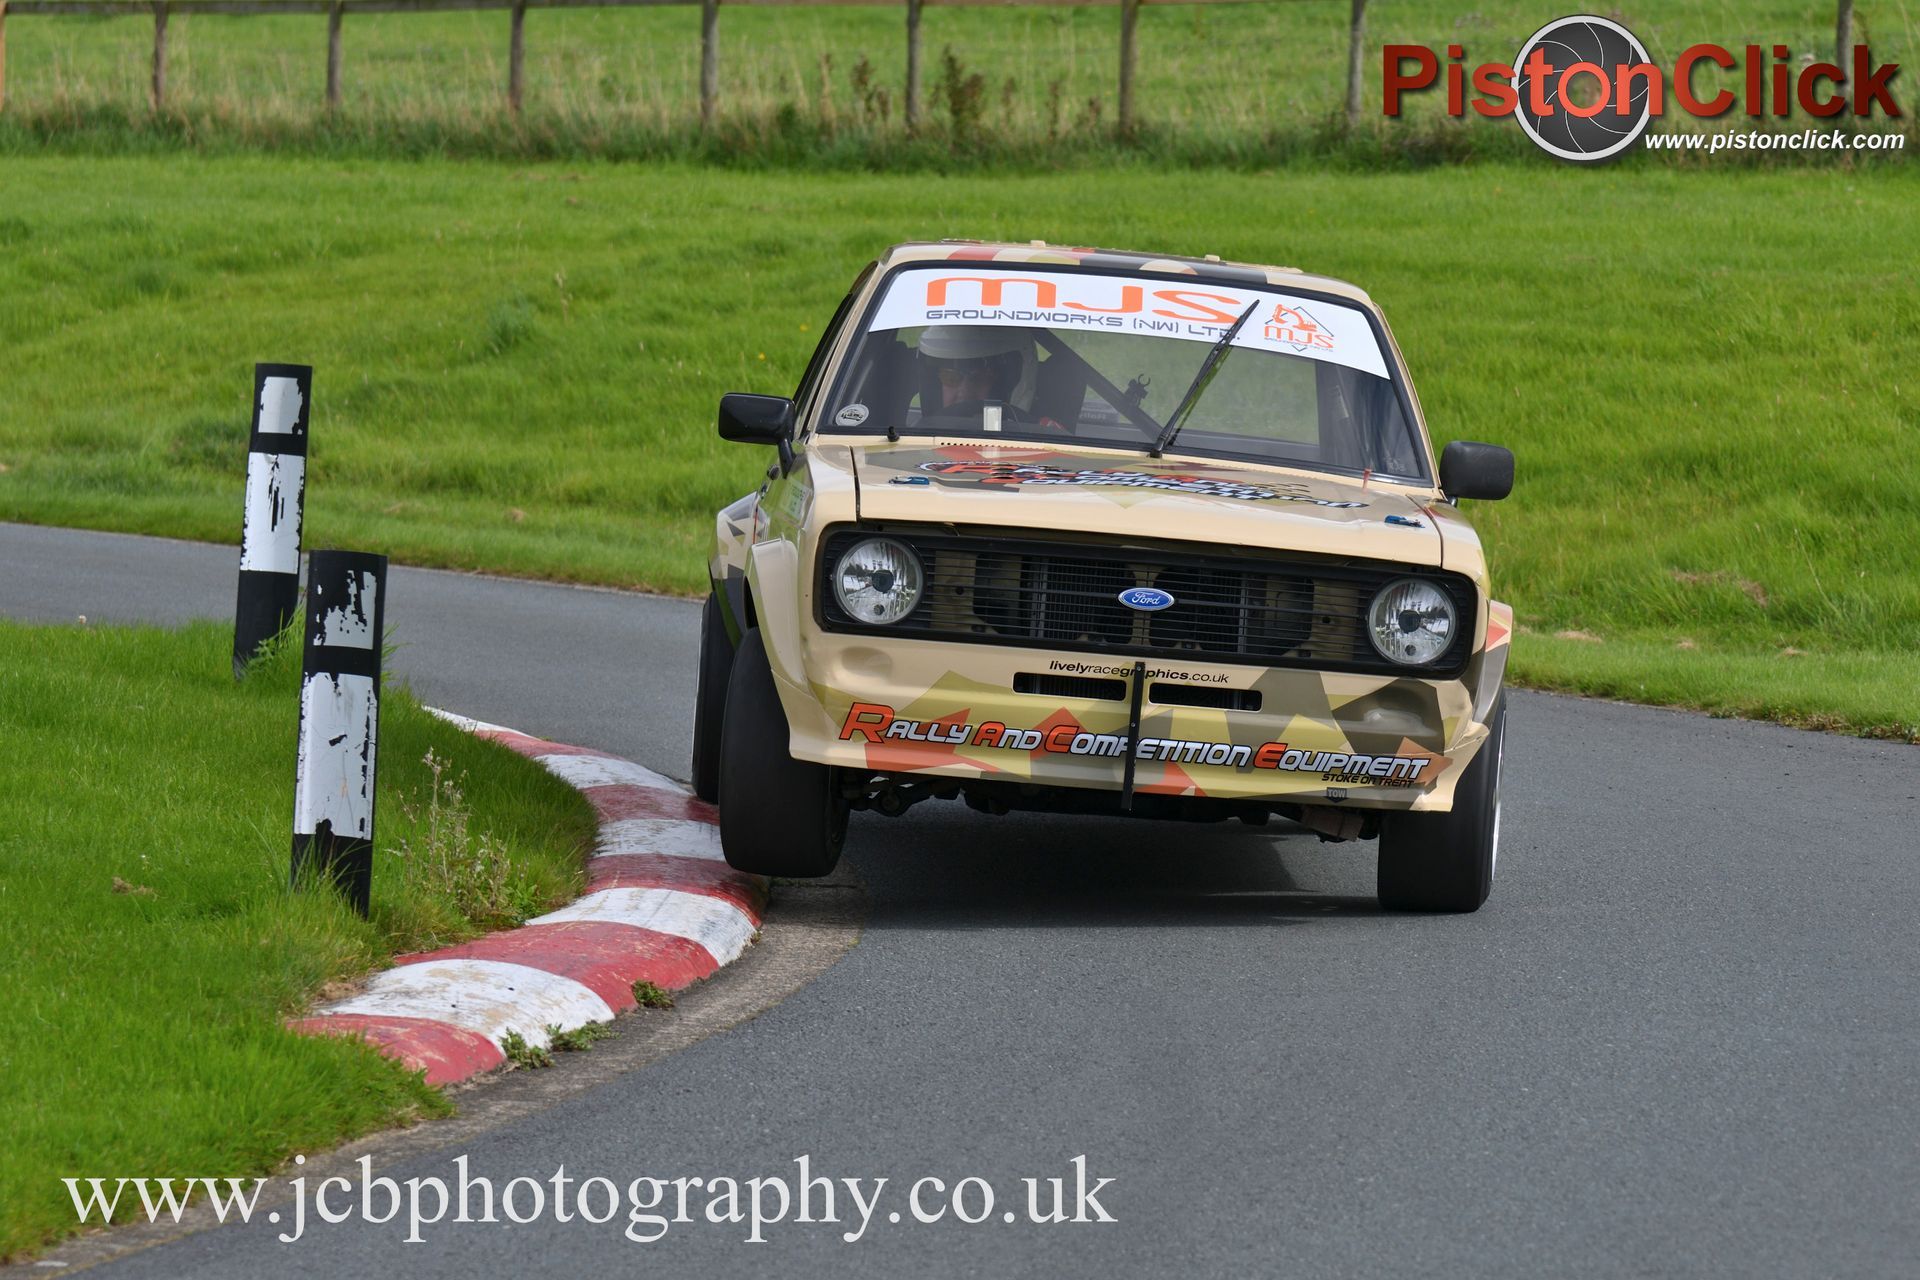 BARC Yorkshire Centre organised the Summer Championship Hillclimb event on Sunday 27th August as part of the Harewood Championship